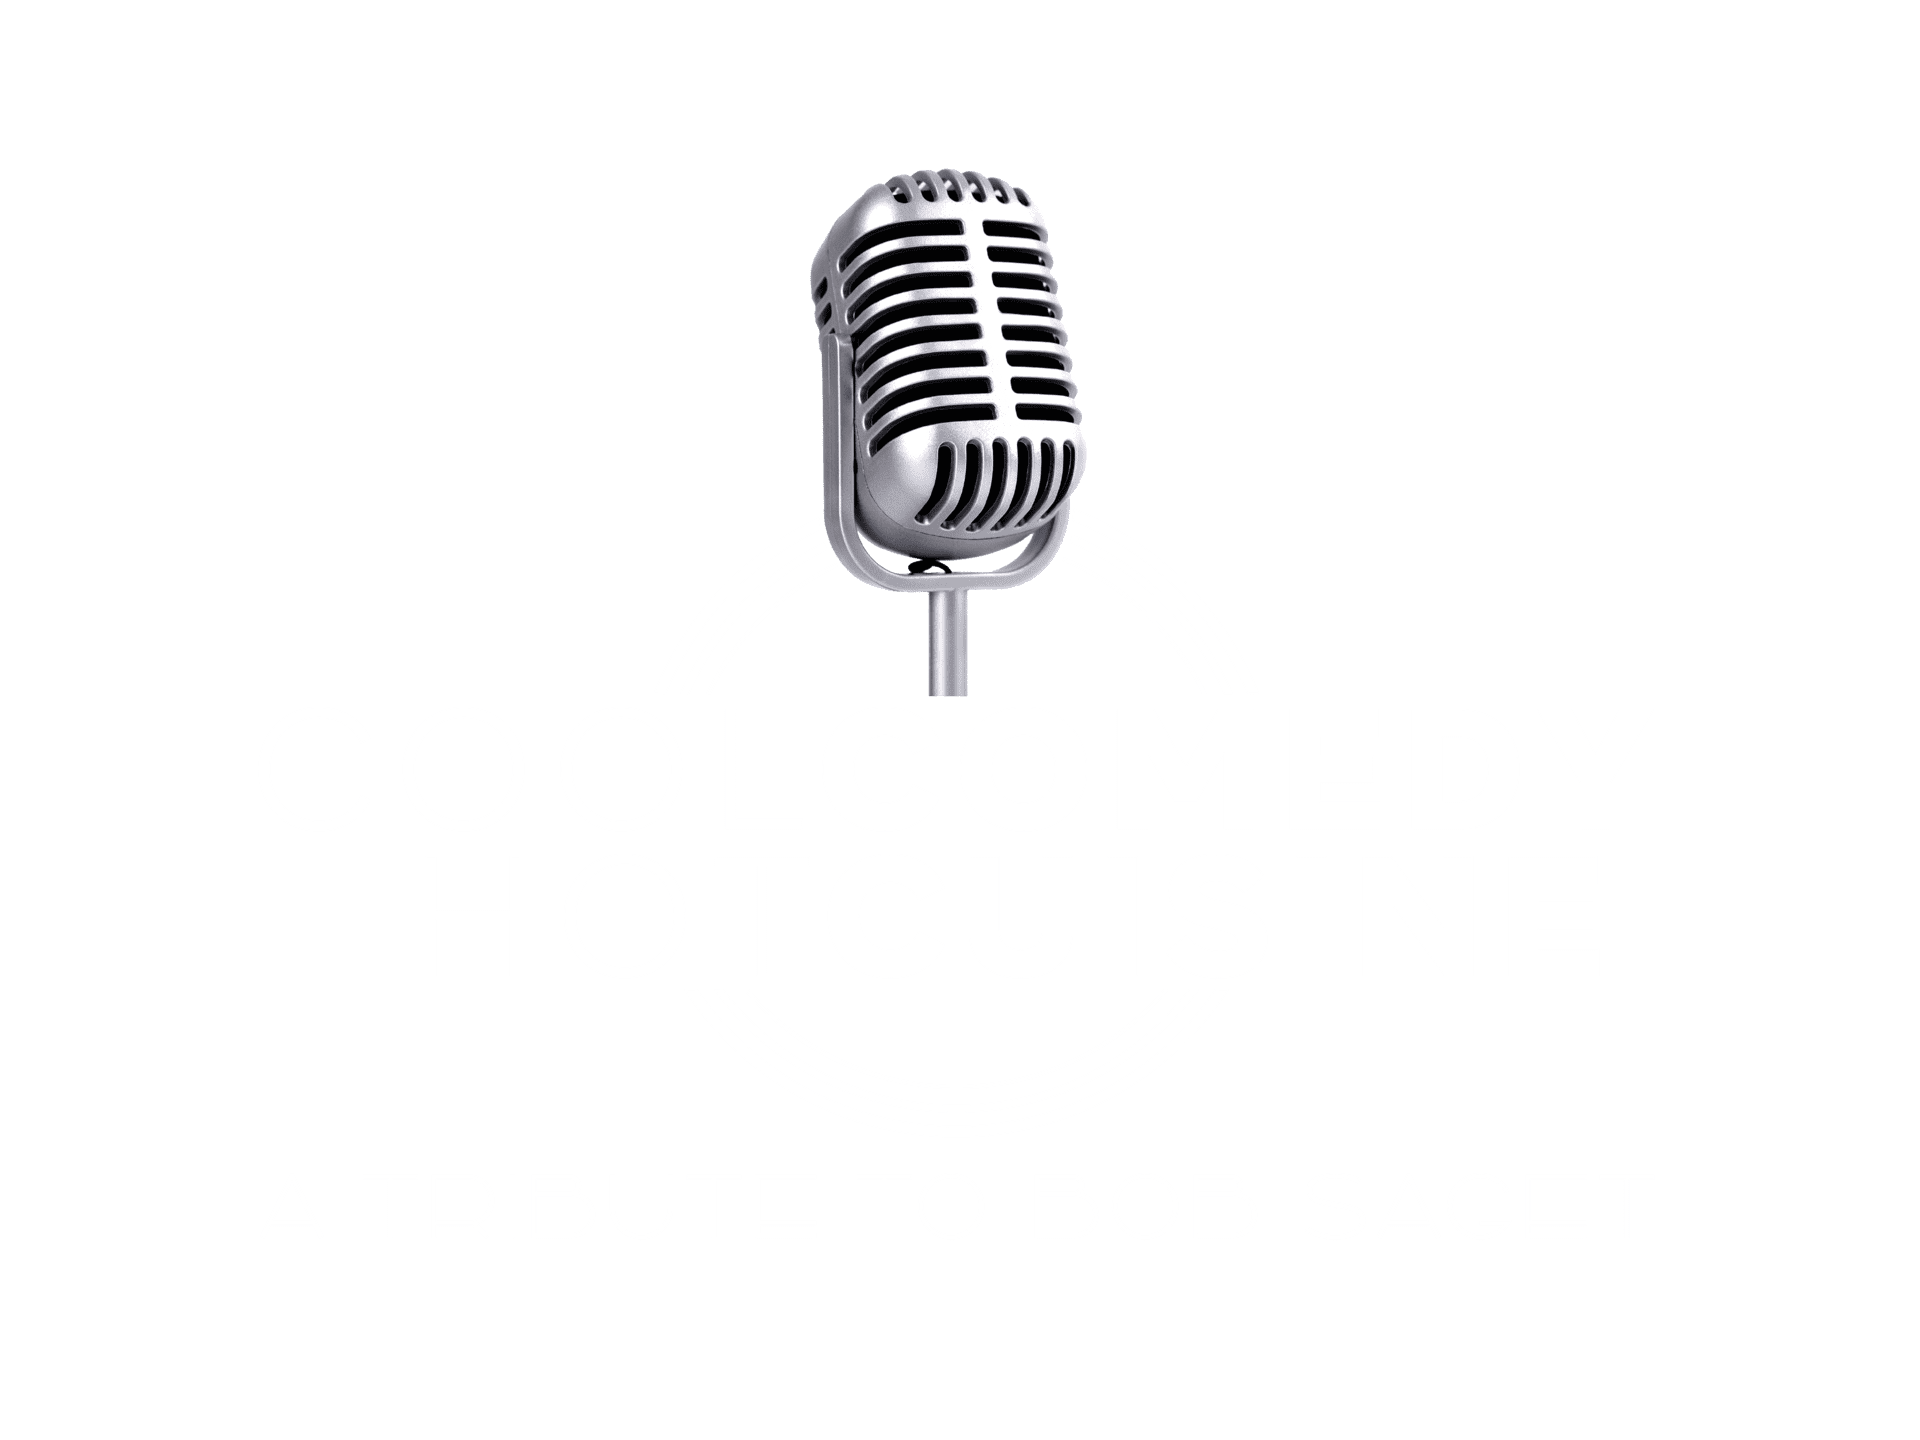 Cool Comedy Hot Cuisine - A Tribute to Bob Saget